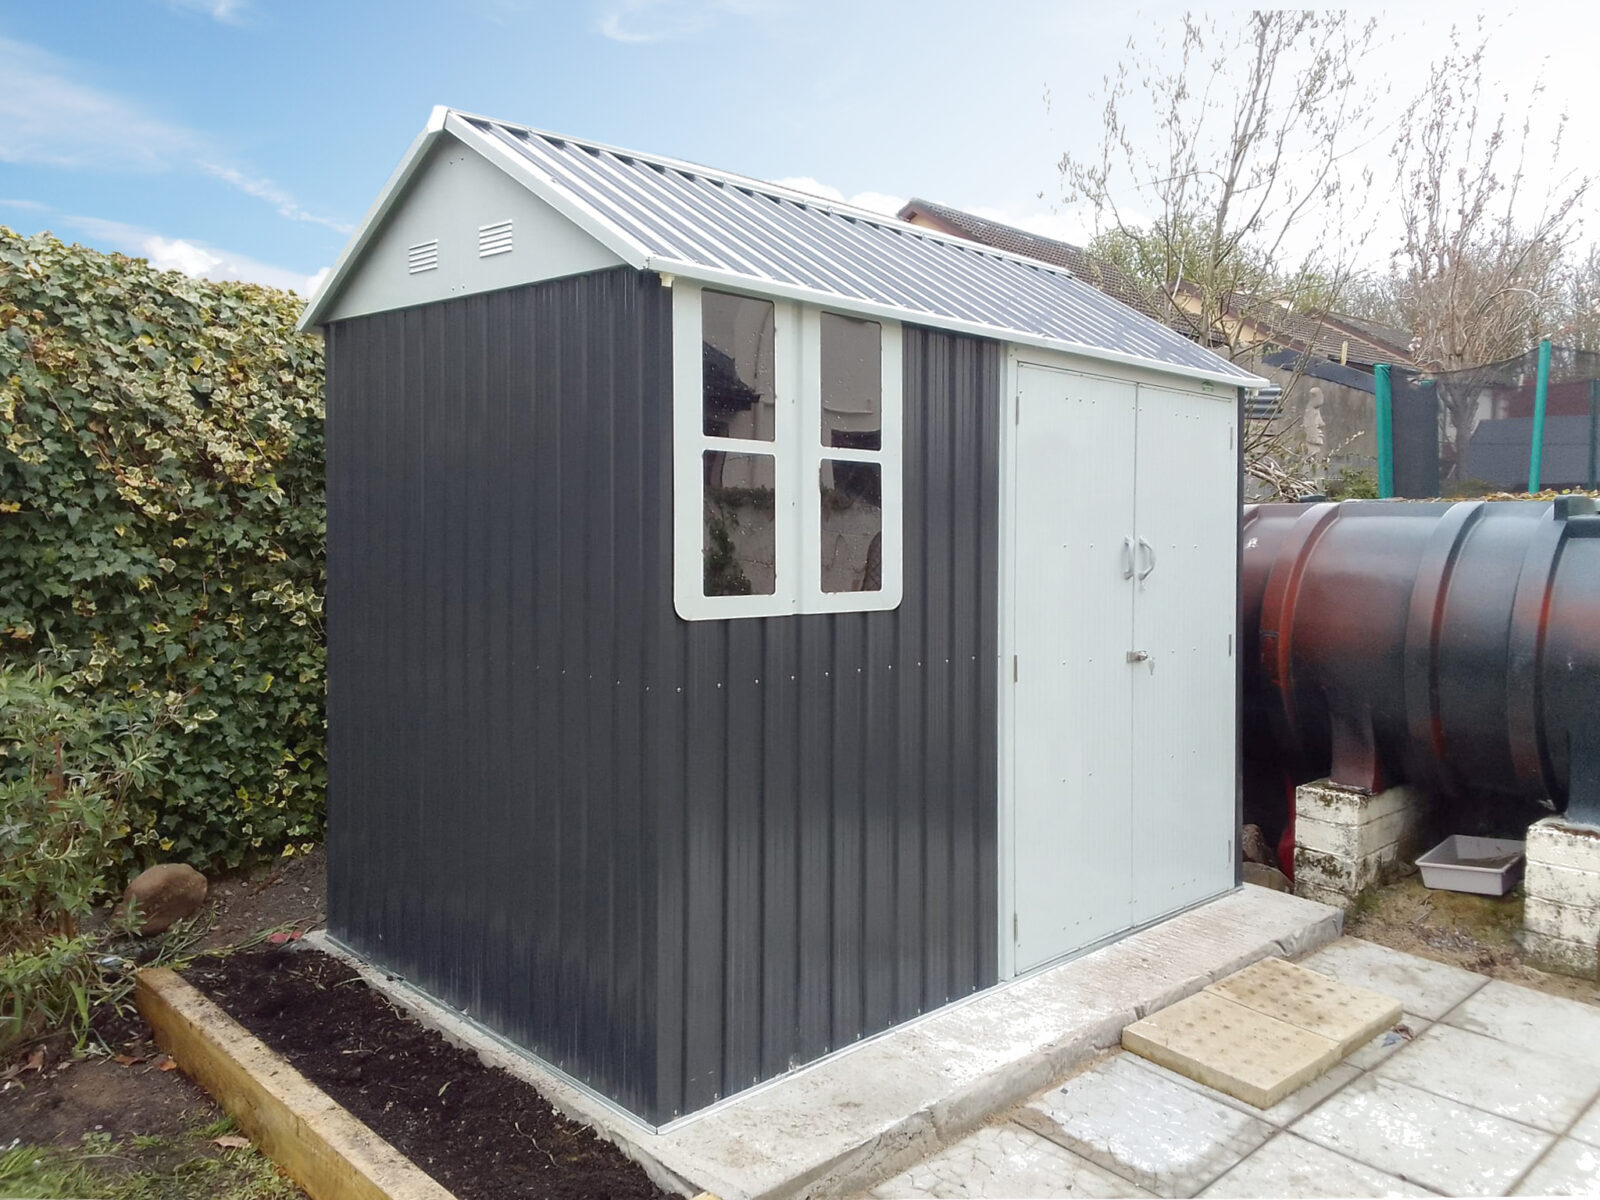 The 8ft x 6ft steel cottage shed assembled in a garden, There is a concrete base beneath it, some slabs leading up to it and an empty flower bed to the side.